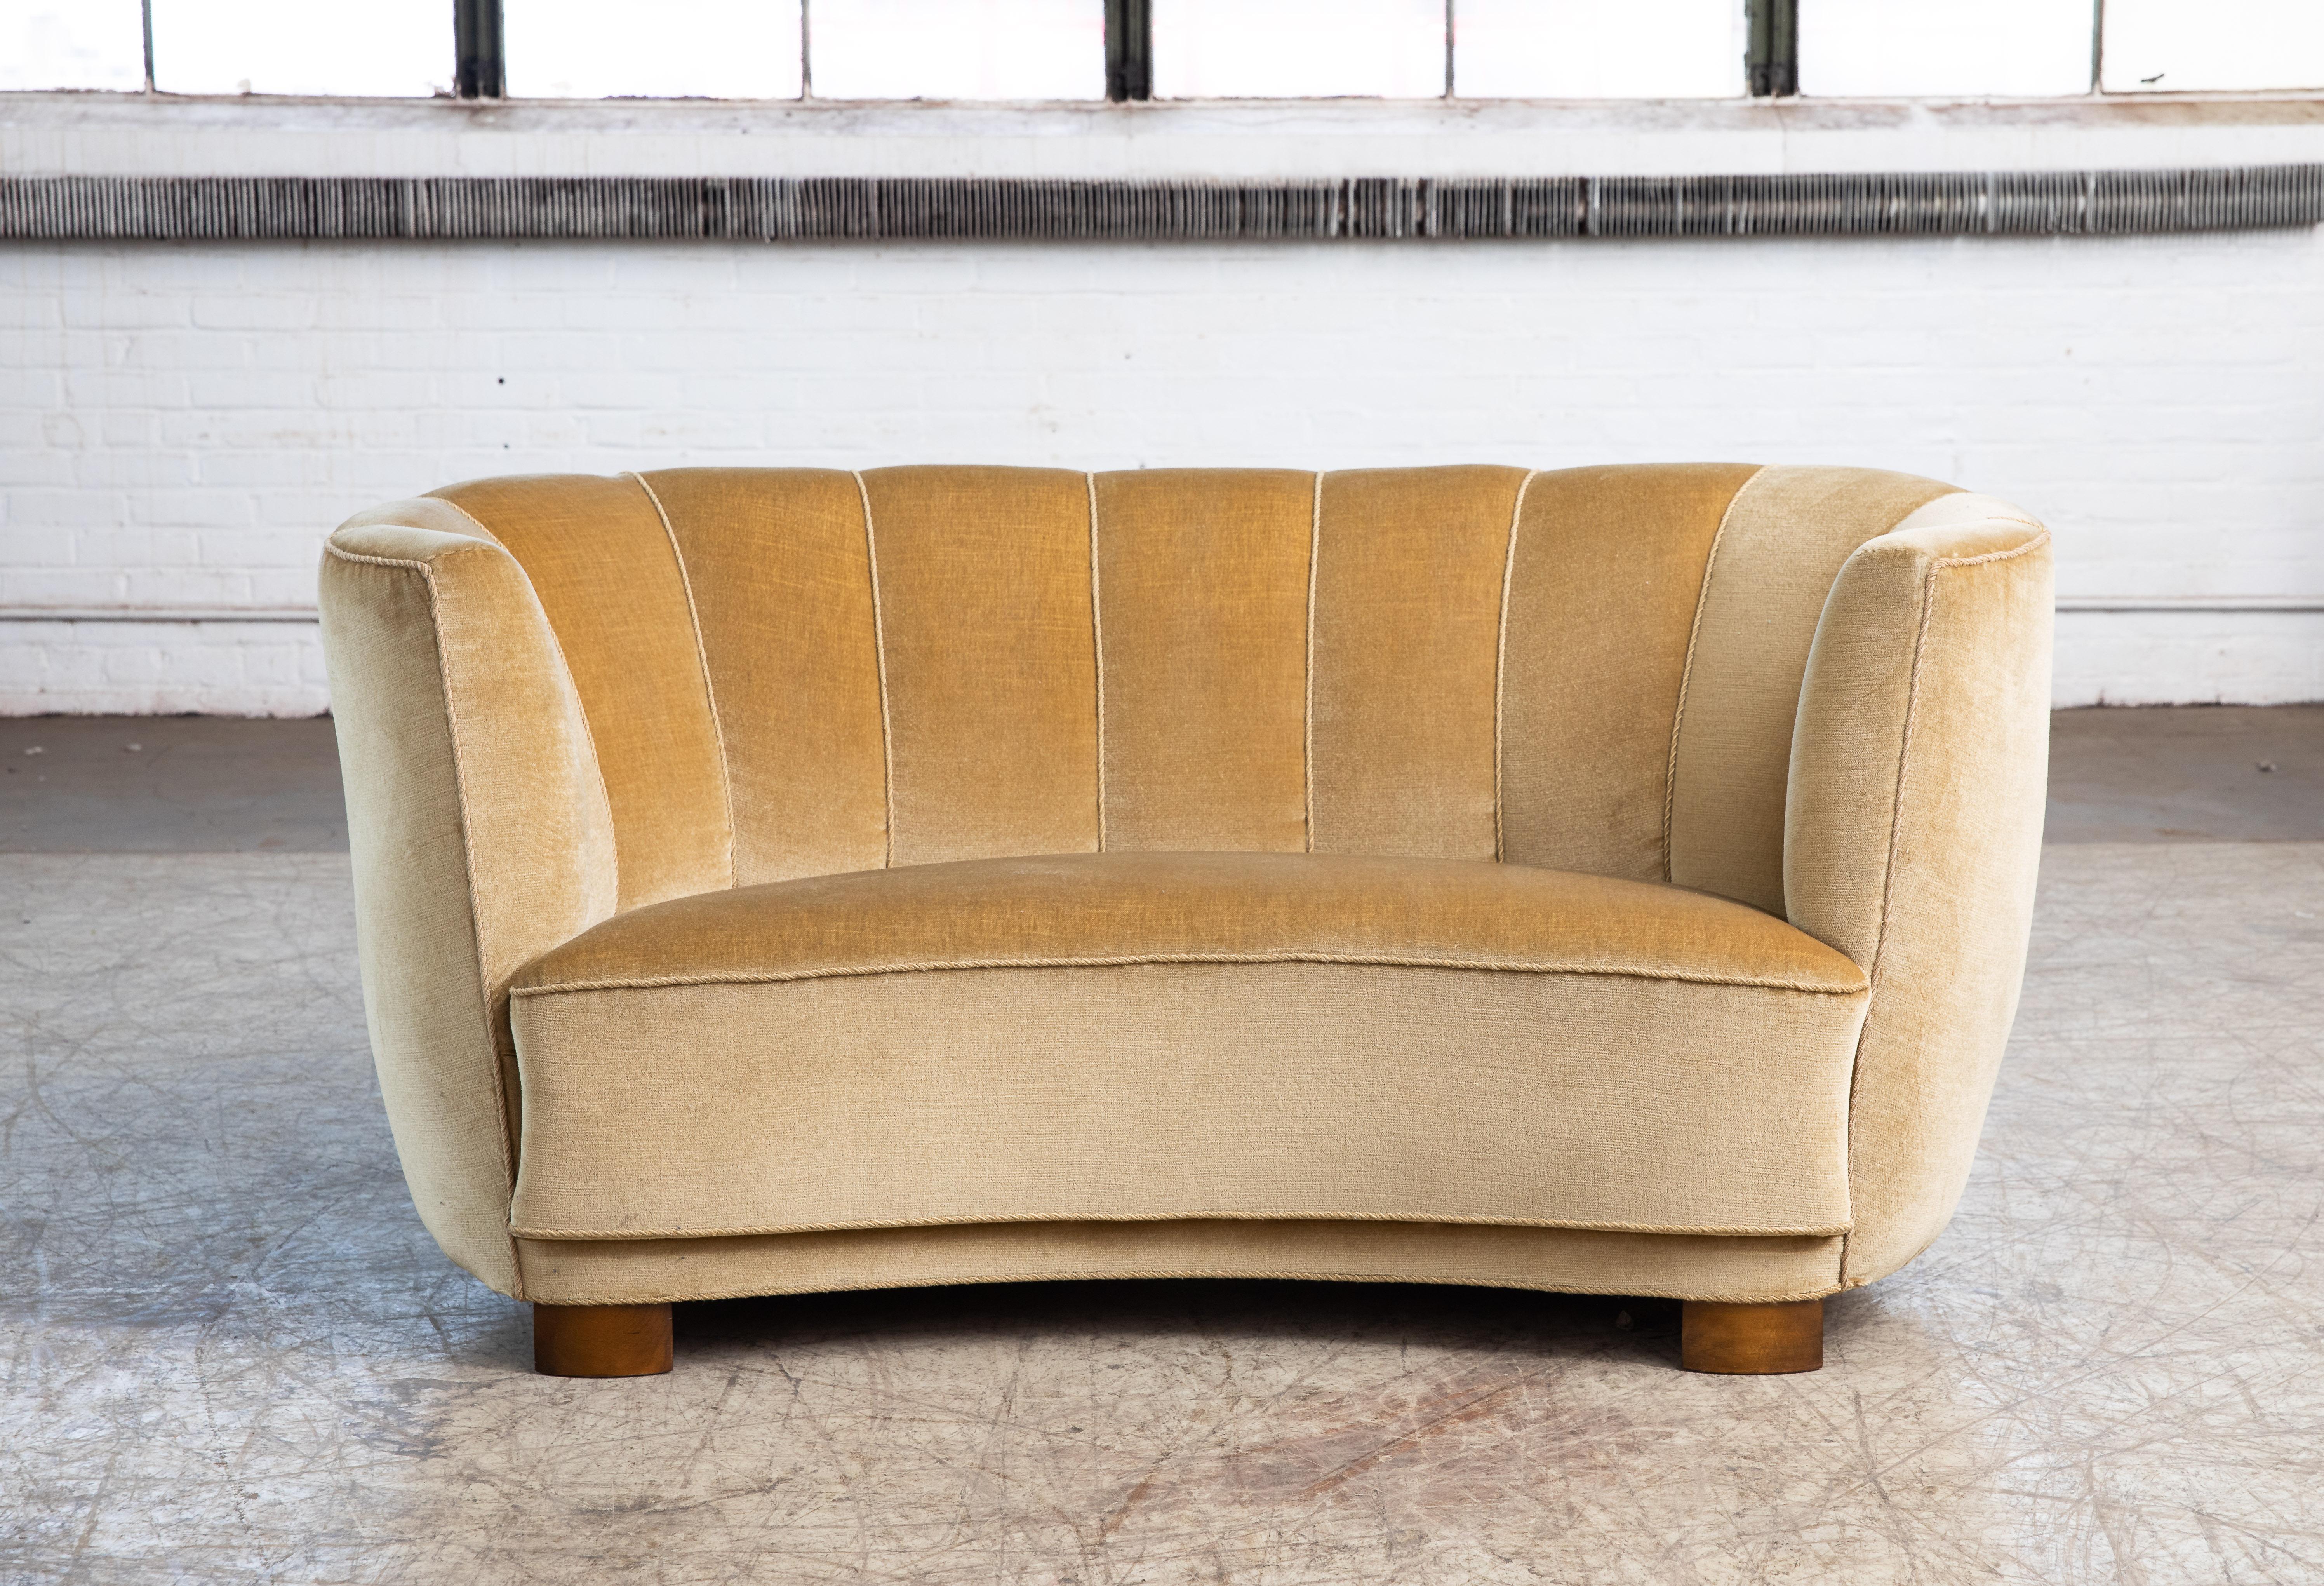 Viggo Boesen style banana shaped or curved Loveseat made in Denmark, circa 1940. This small sofa will make a strong statement in any room. Beautiful round voluptuous lines and with large block legs. Re-upholstered at a later pont in a yellow mohair